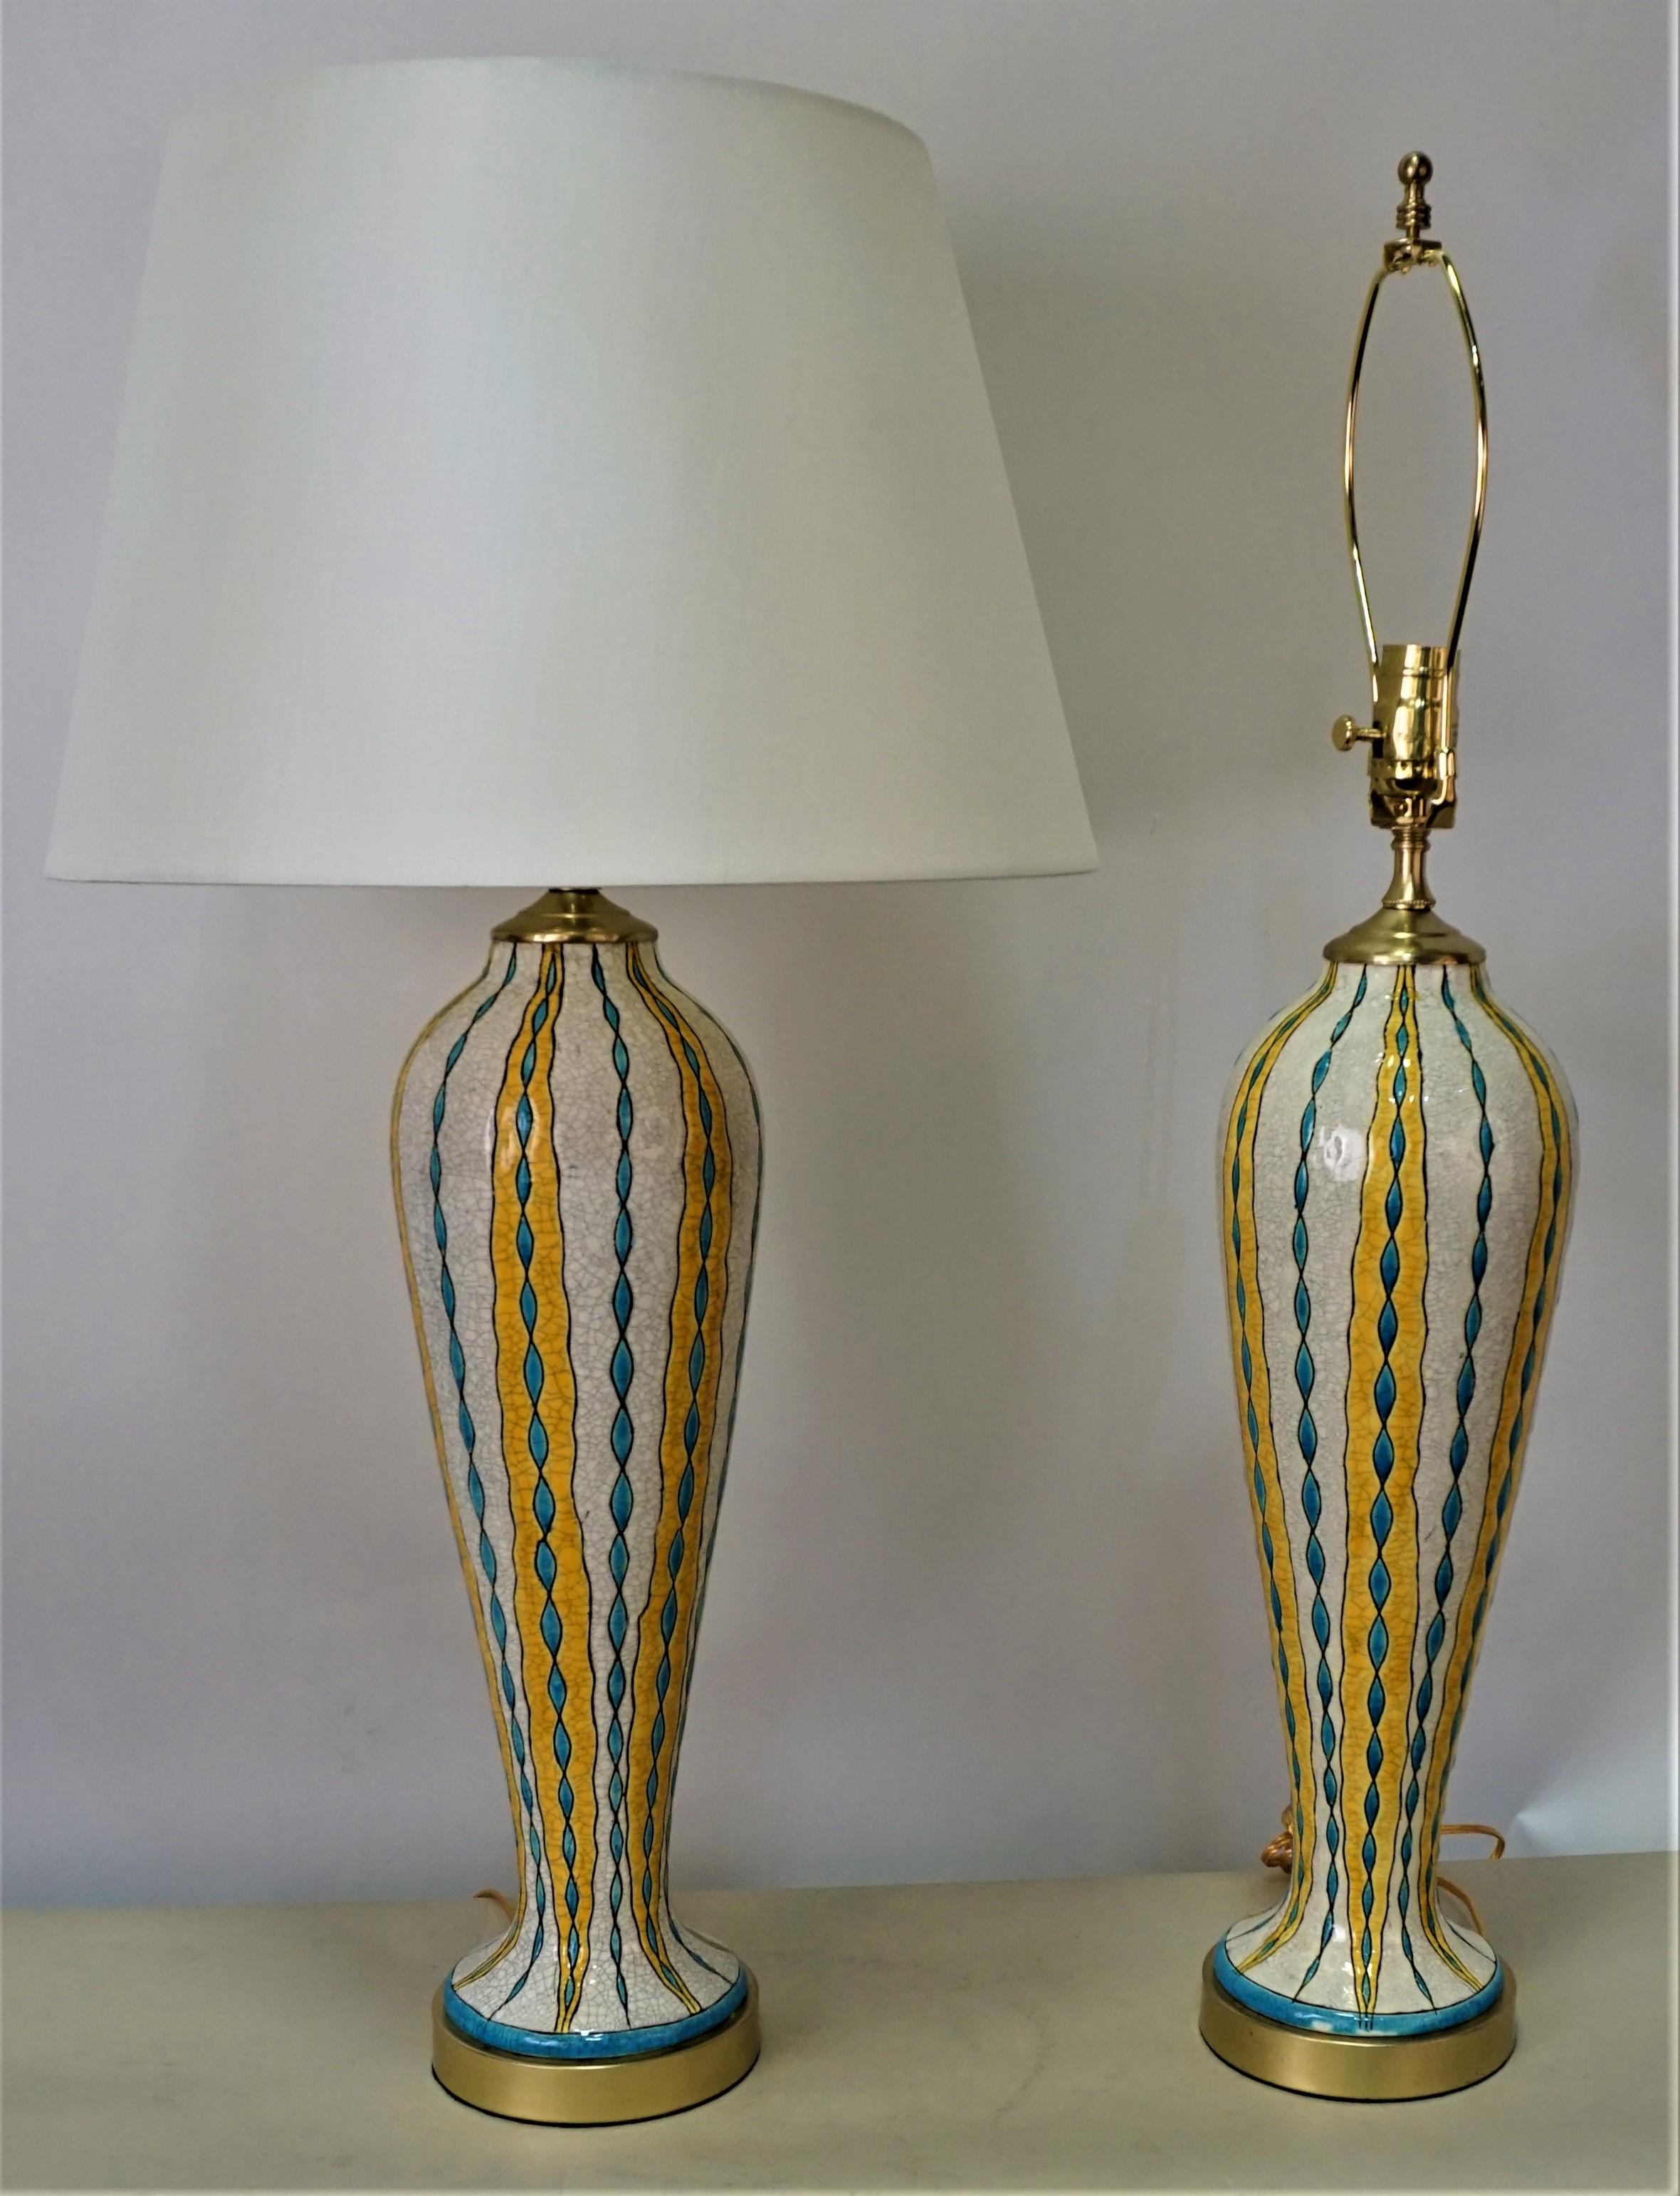 Pair of Electrified Lamps Keramis Art Deco vase by Charles Catteau for Boch 1